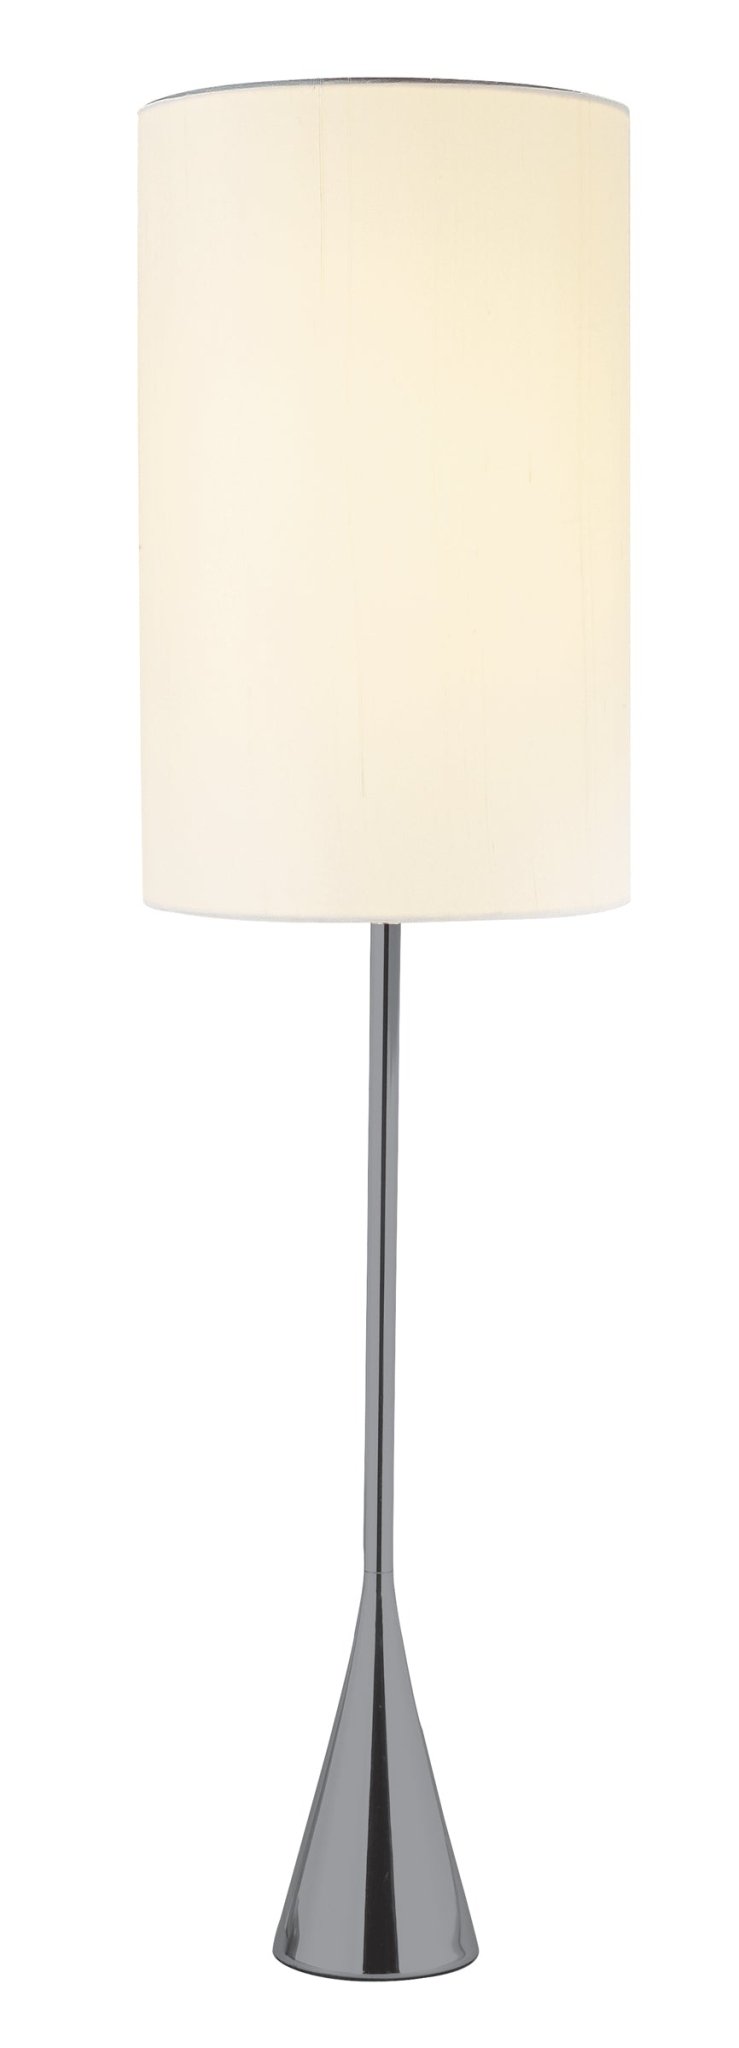 Black-Nickel-Finish-Metal-Tall-White-Shade-Table-Lamp-Table-Lamps